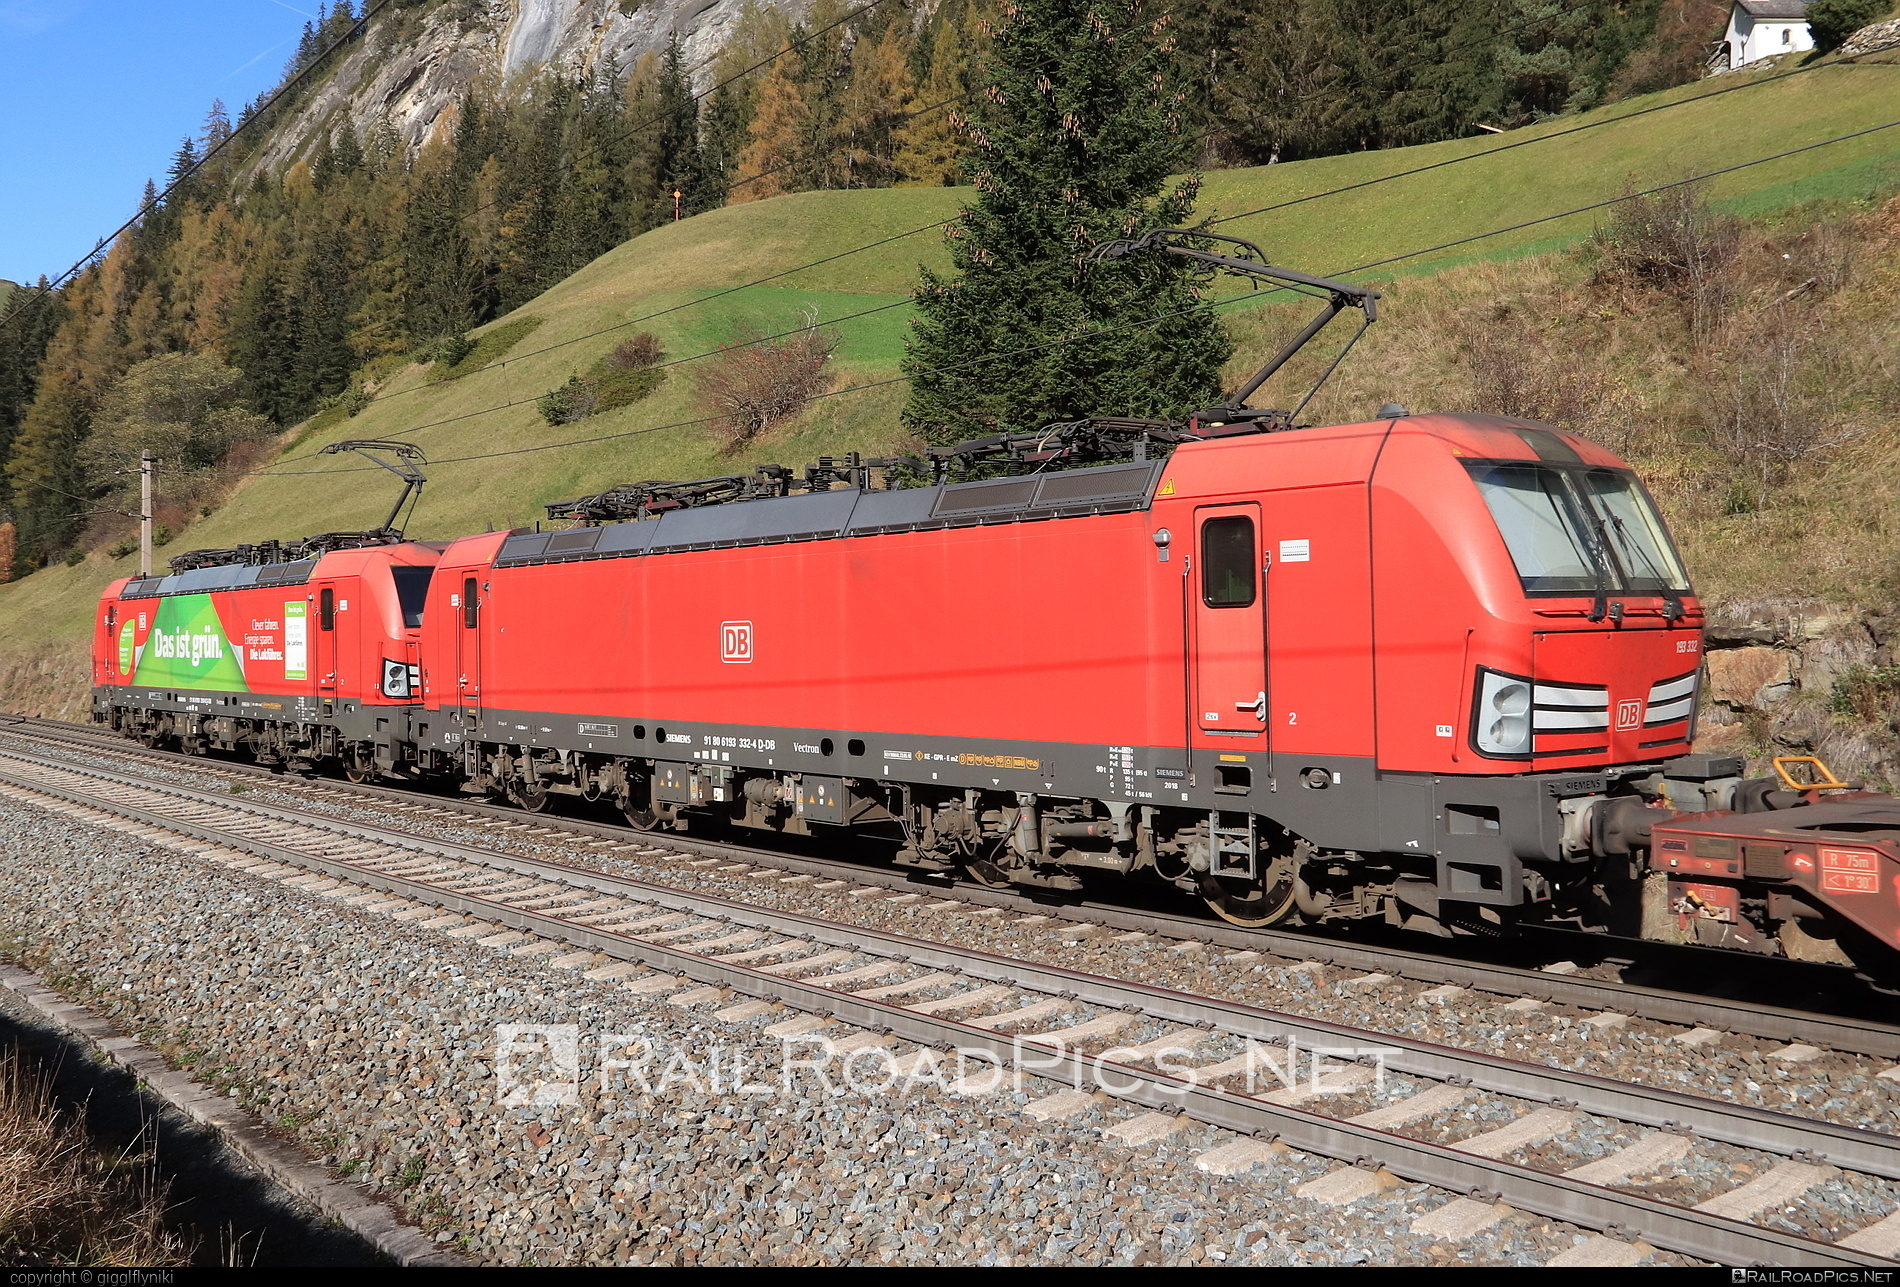 Siemens Vectron MS - 193 332 operated by DB Cargo AG #db #dbcargo #dbcargoag #deutschebahn #siemens #siemensVectron #siemensVectronMS #vectron #vectronMS